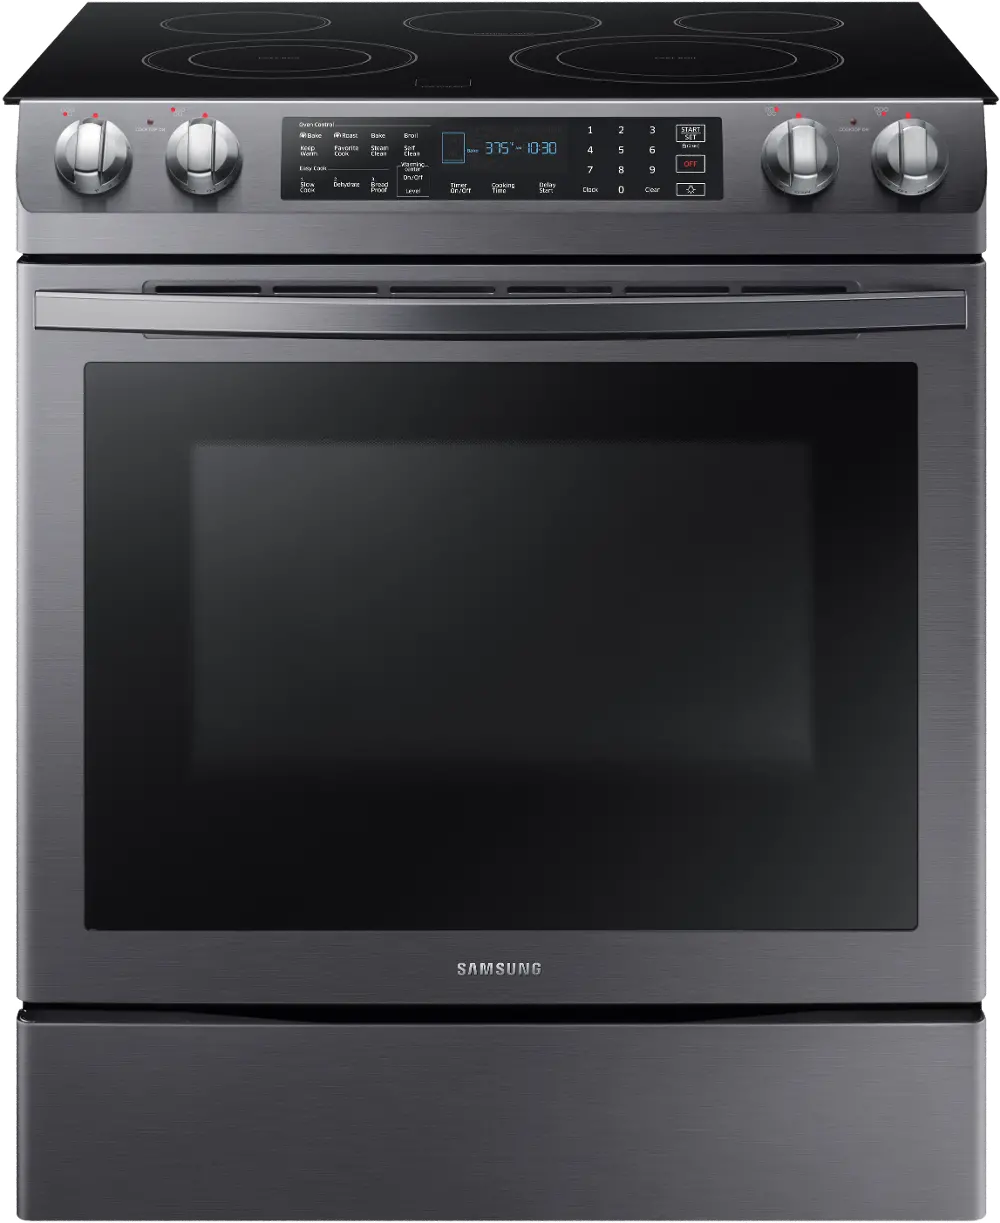 NE58R9431SG Samsung 30 Inch Slide In Electric Range with Convection - 5.8 cu. ft. Black Stainless Steel-1